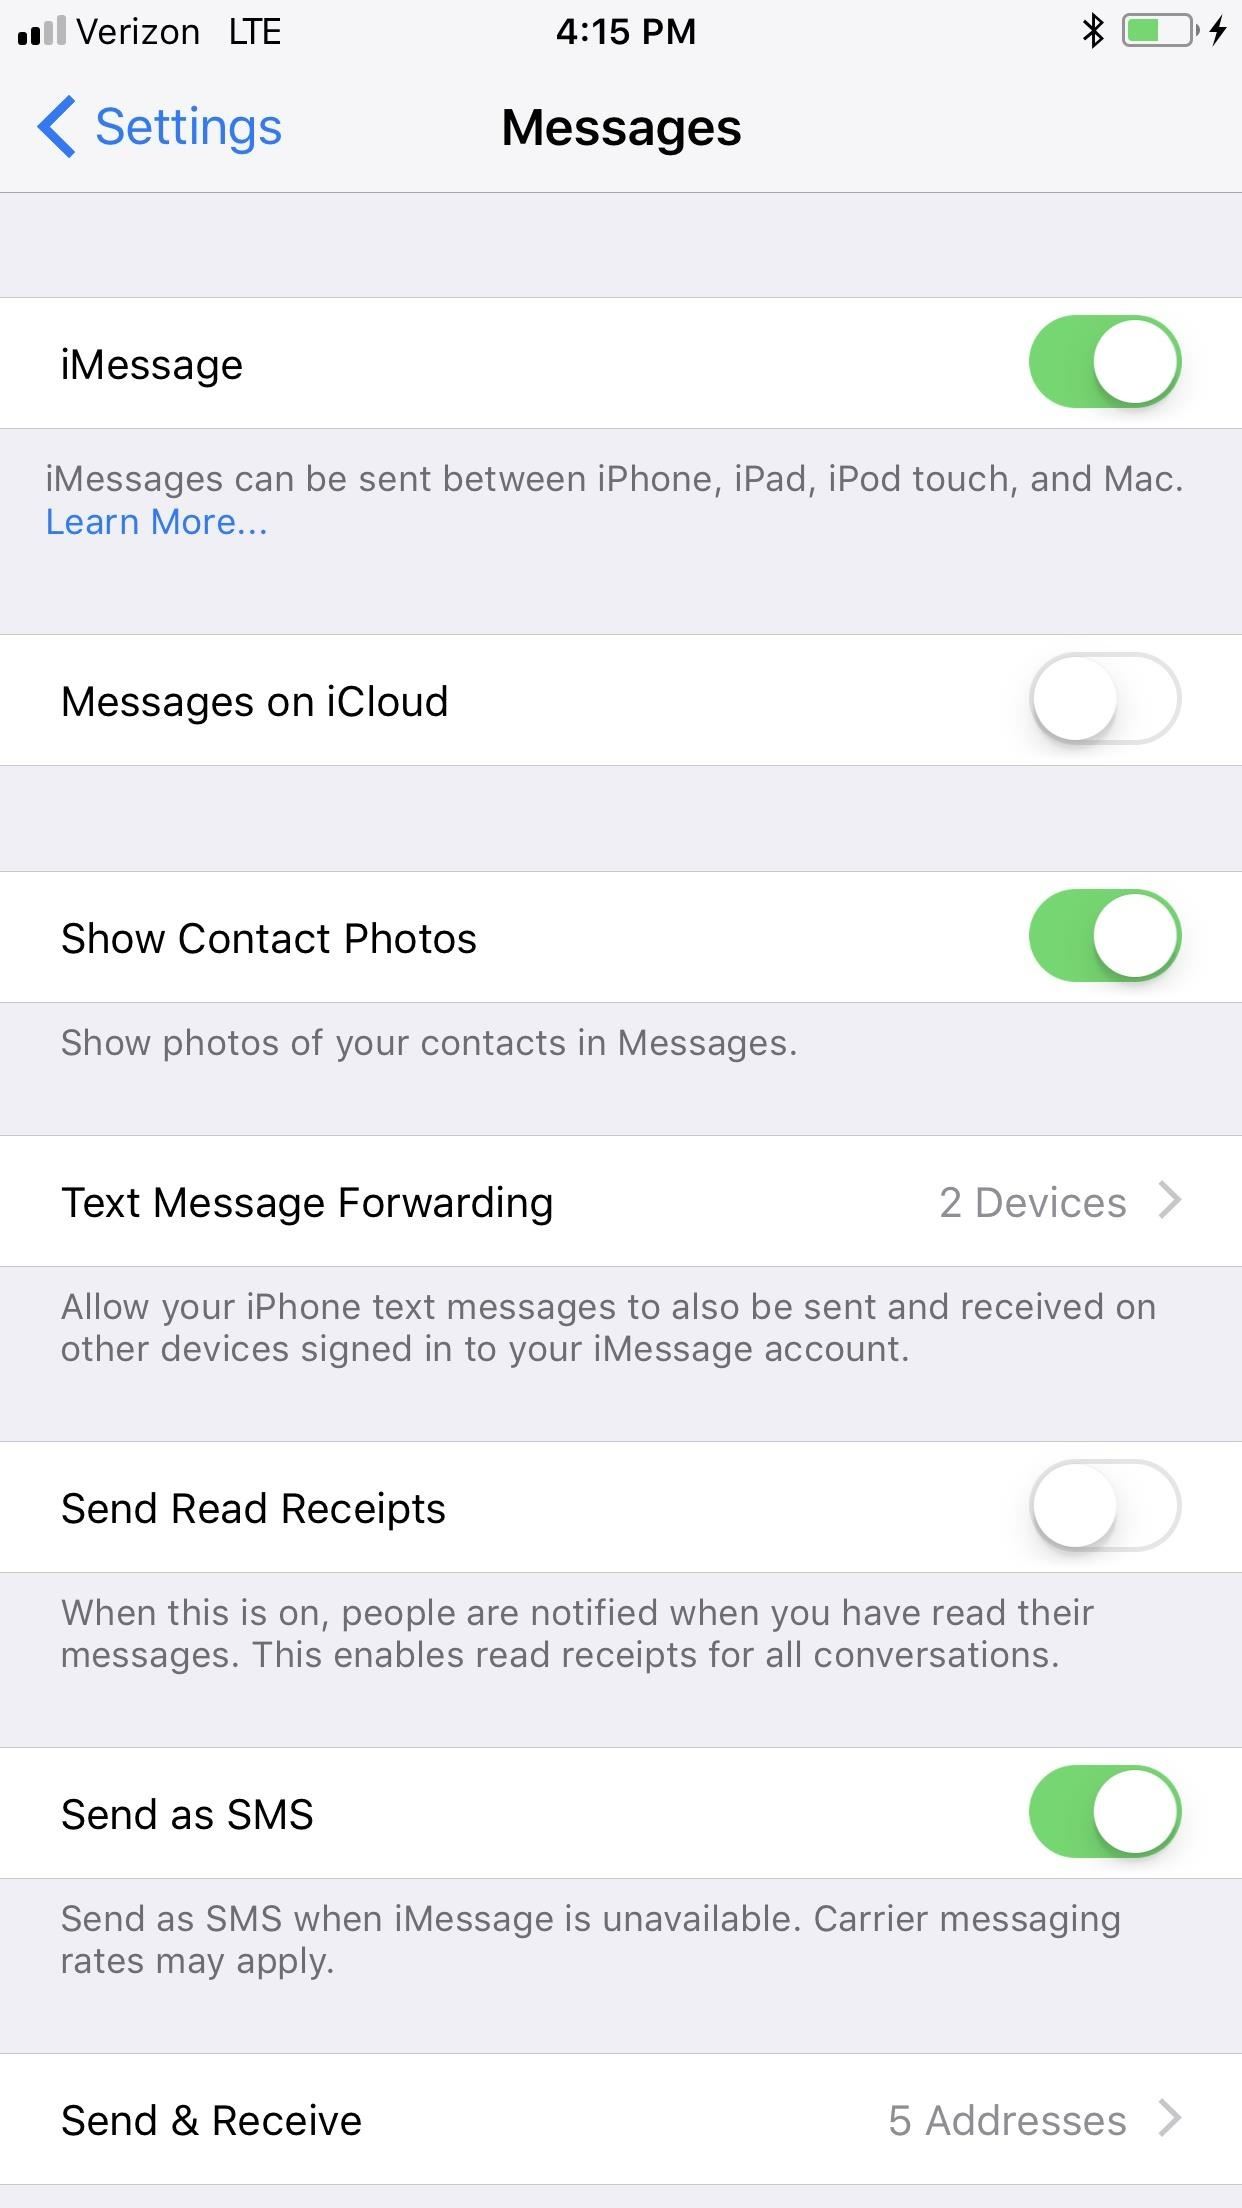 91 Cool New iOS 11 Features You Didn't Know About